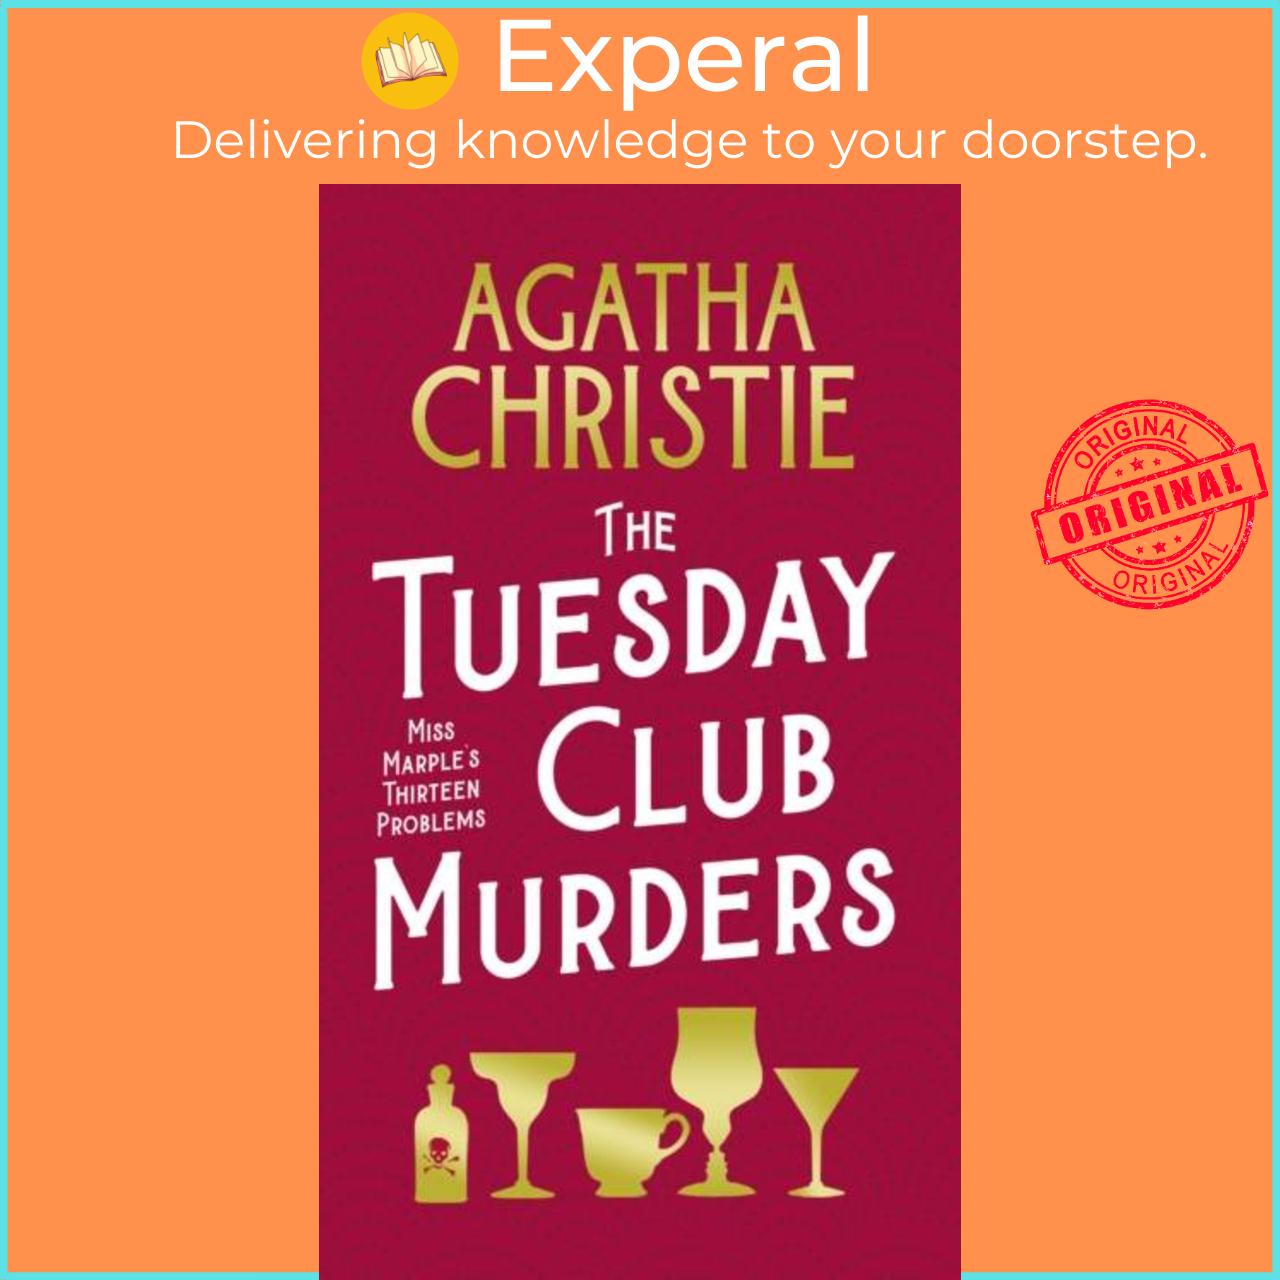 Sách - The Tuesday Club Murders - Miss Marple's Thirteen Problems by Agatha Christie (UK edition, hardcover)